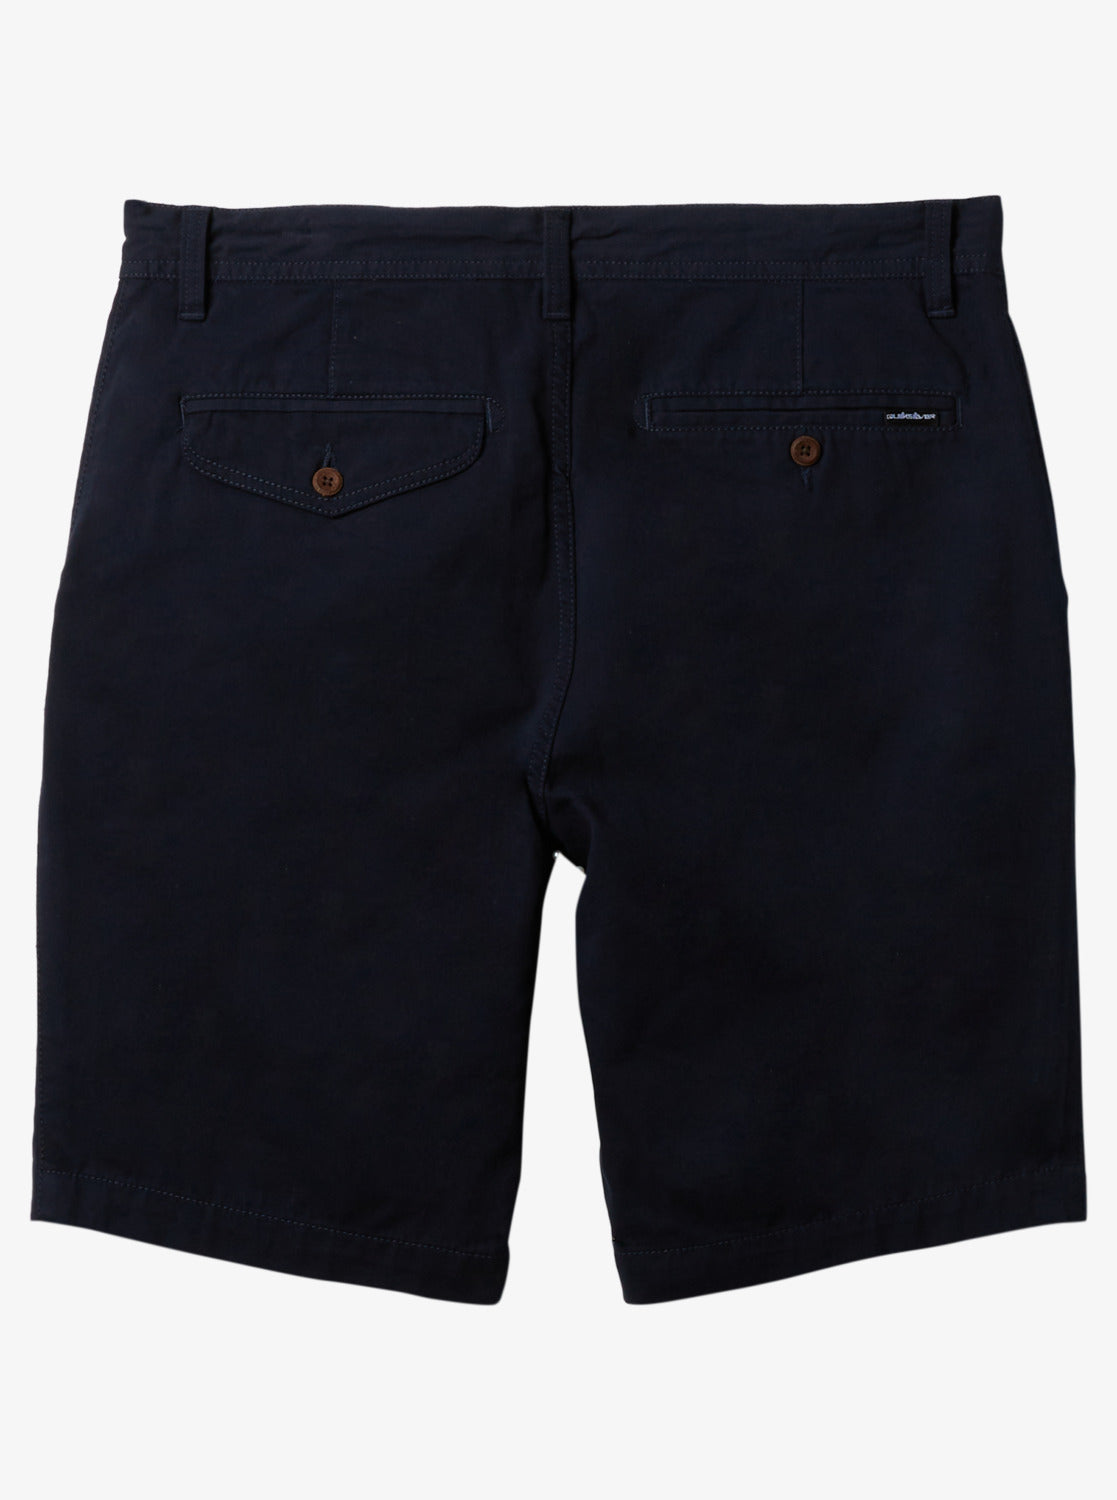 Quiksilver Everyday Union Light Walk Shorts for Men in Navy